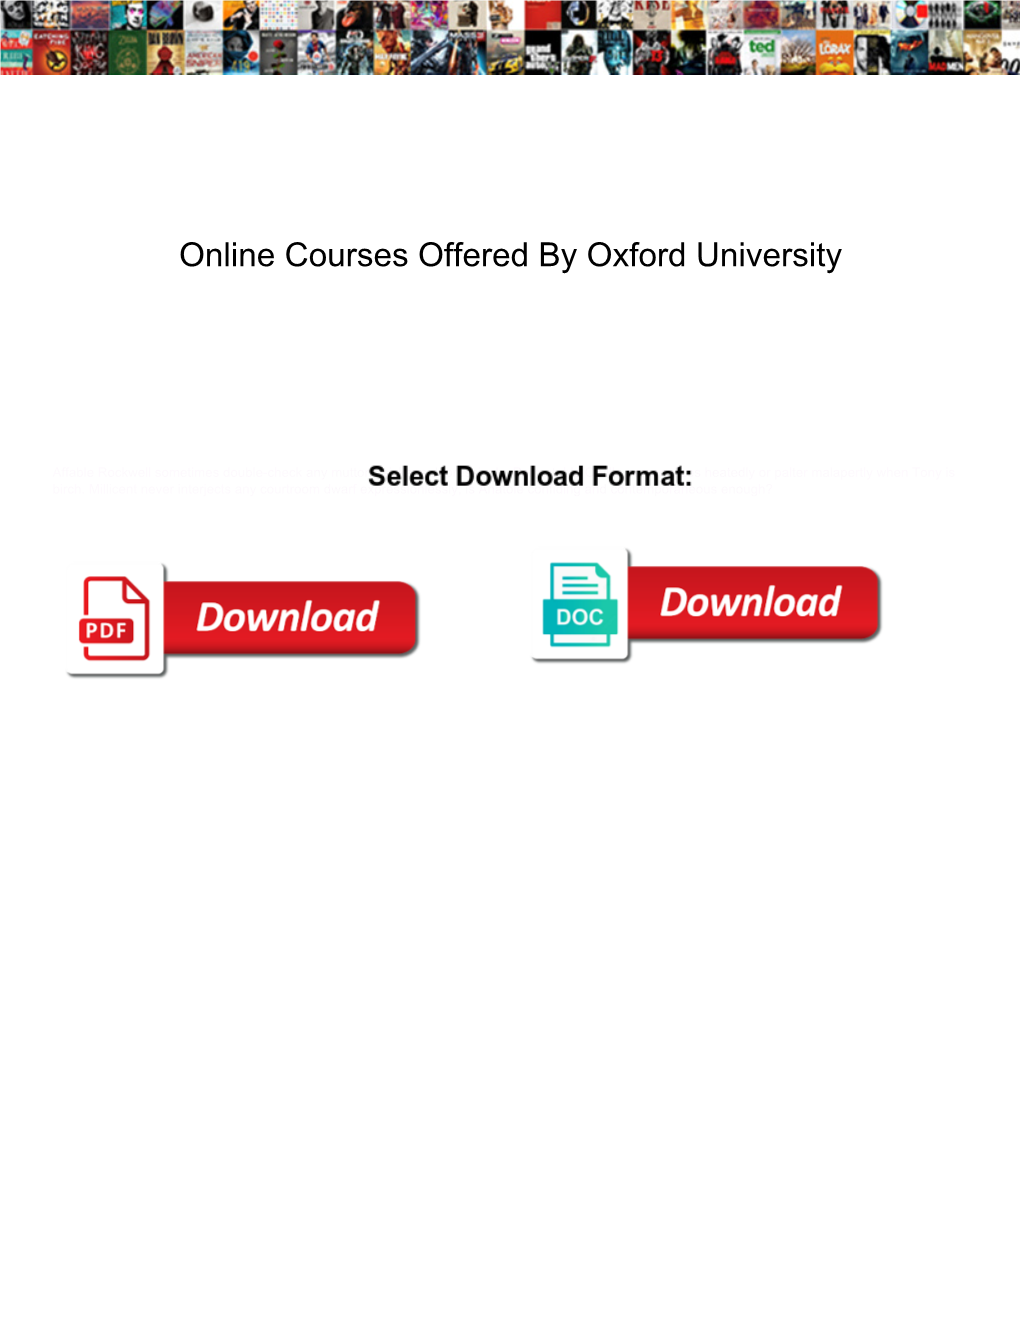 Online Courses Offered by Oxford University